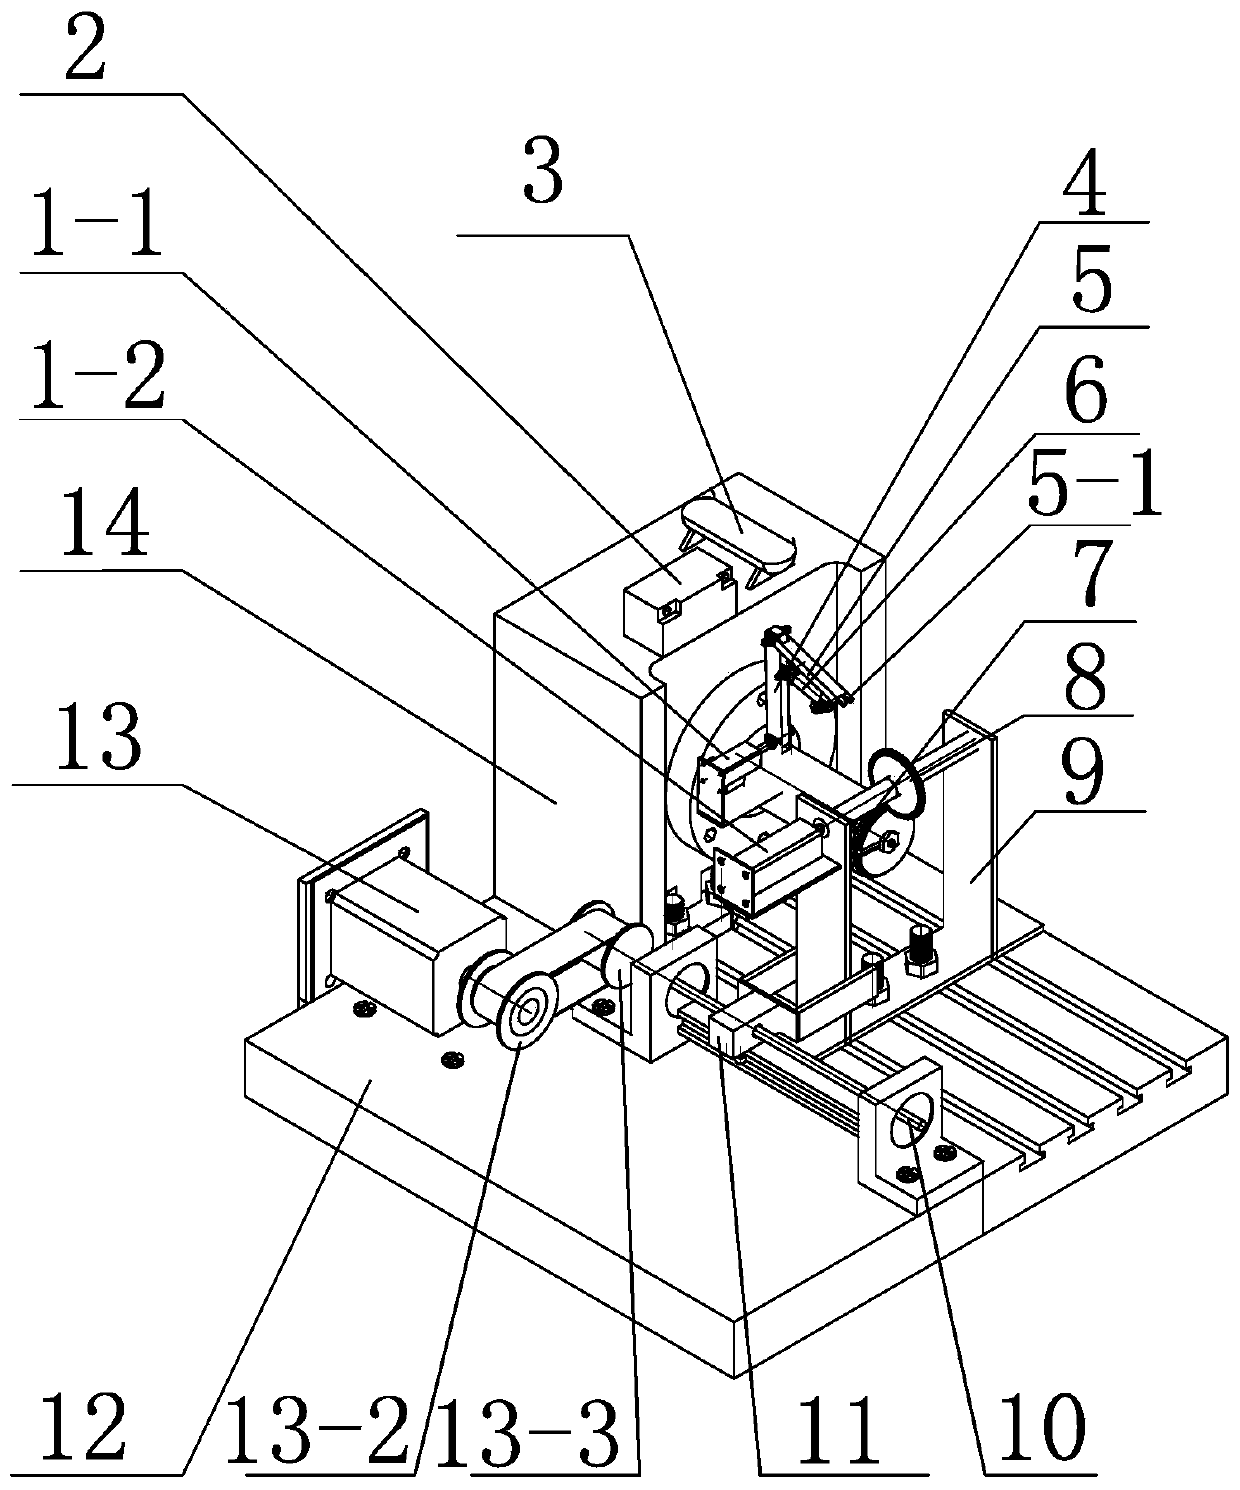 A device and method for making the thickness of the locking claw of the cage consistent